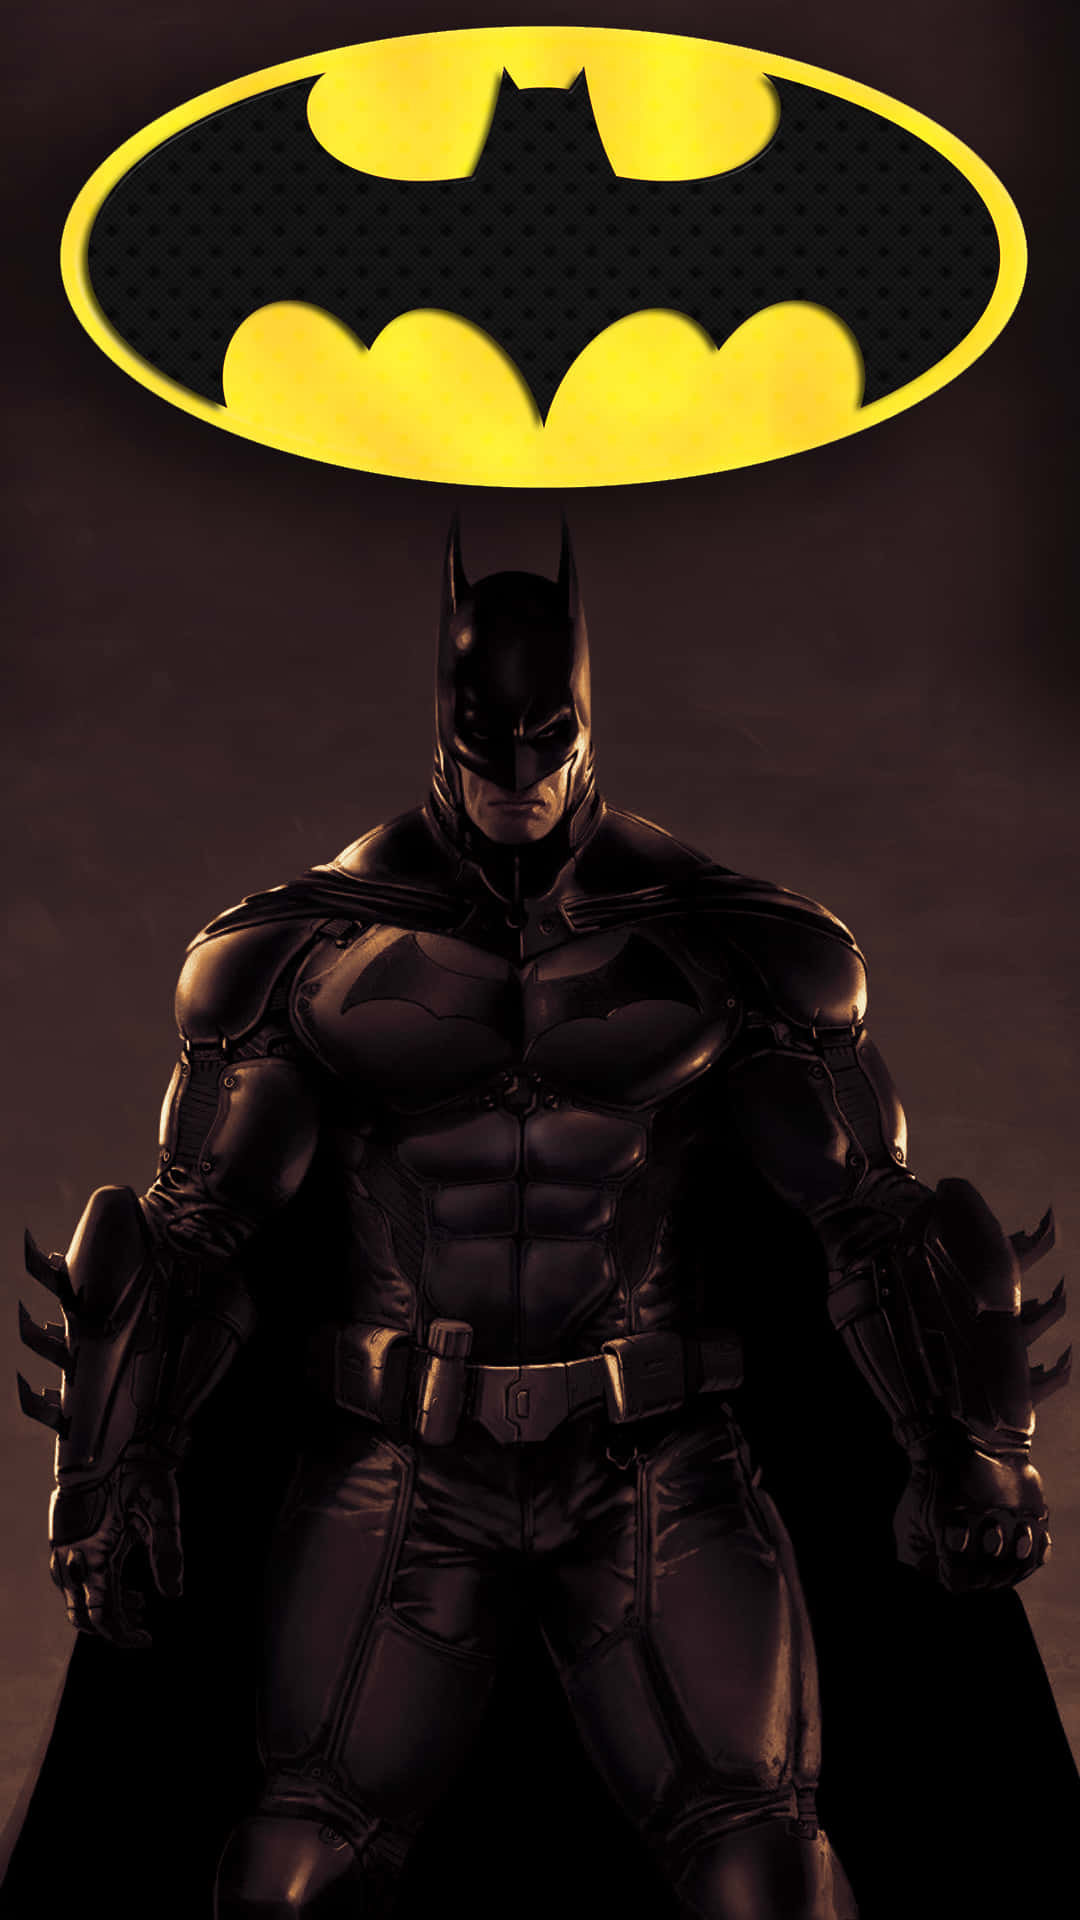 "Batman Android: A Superhero for the Technological Age" Wallpaper